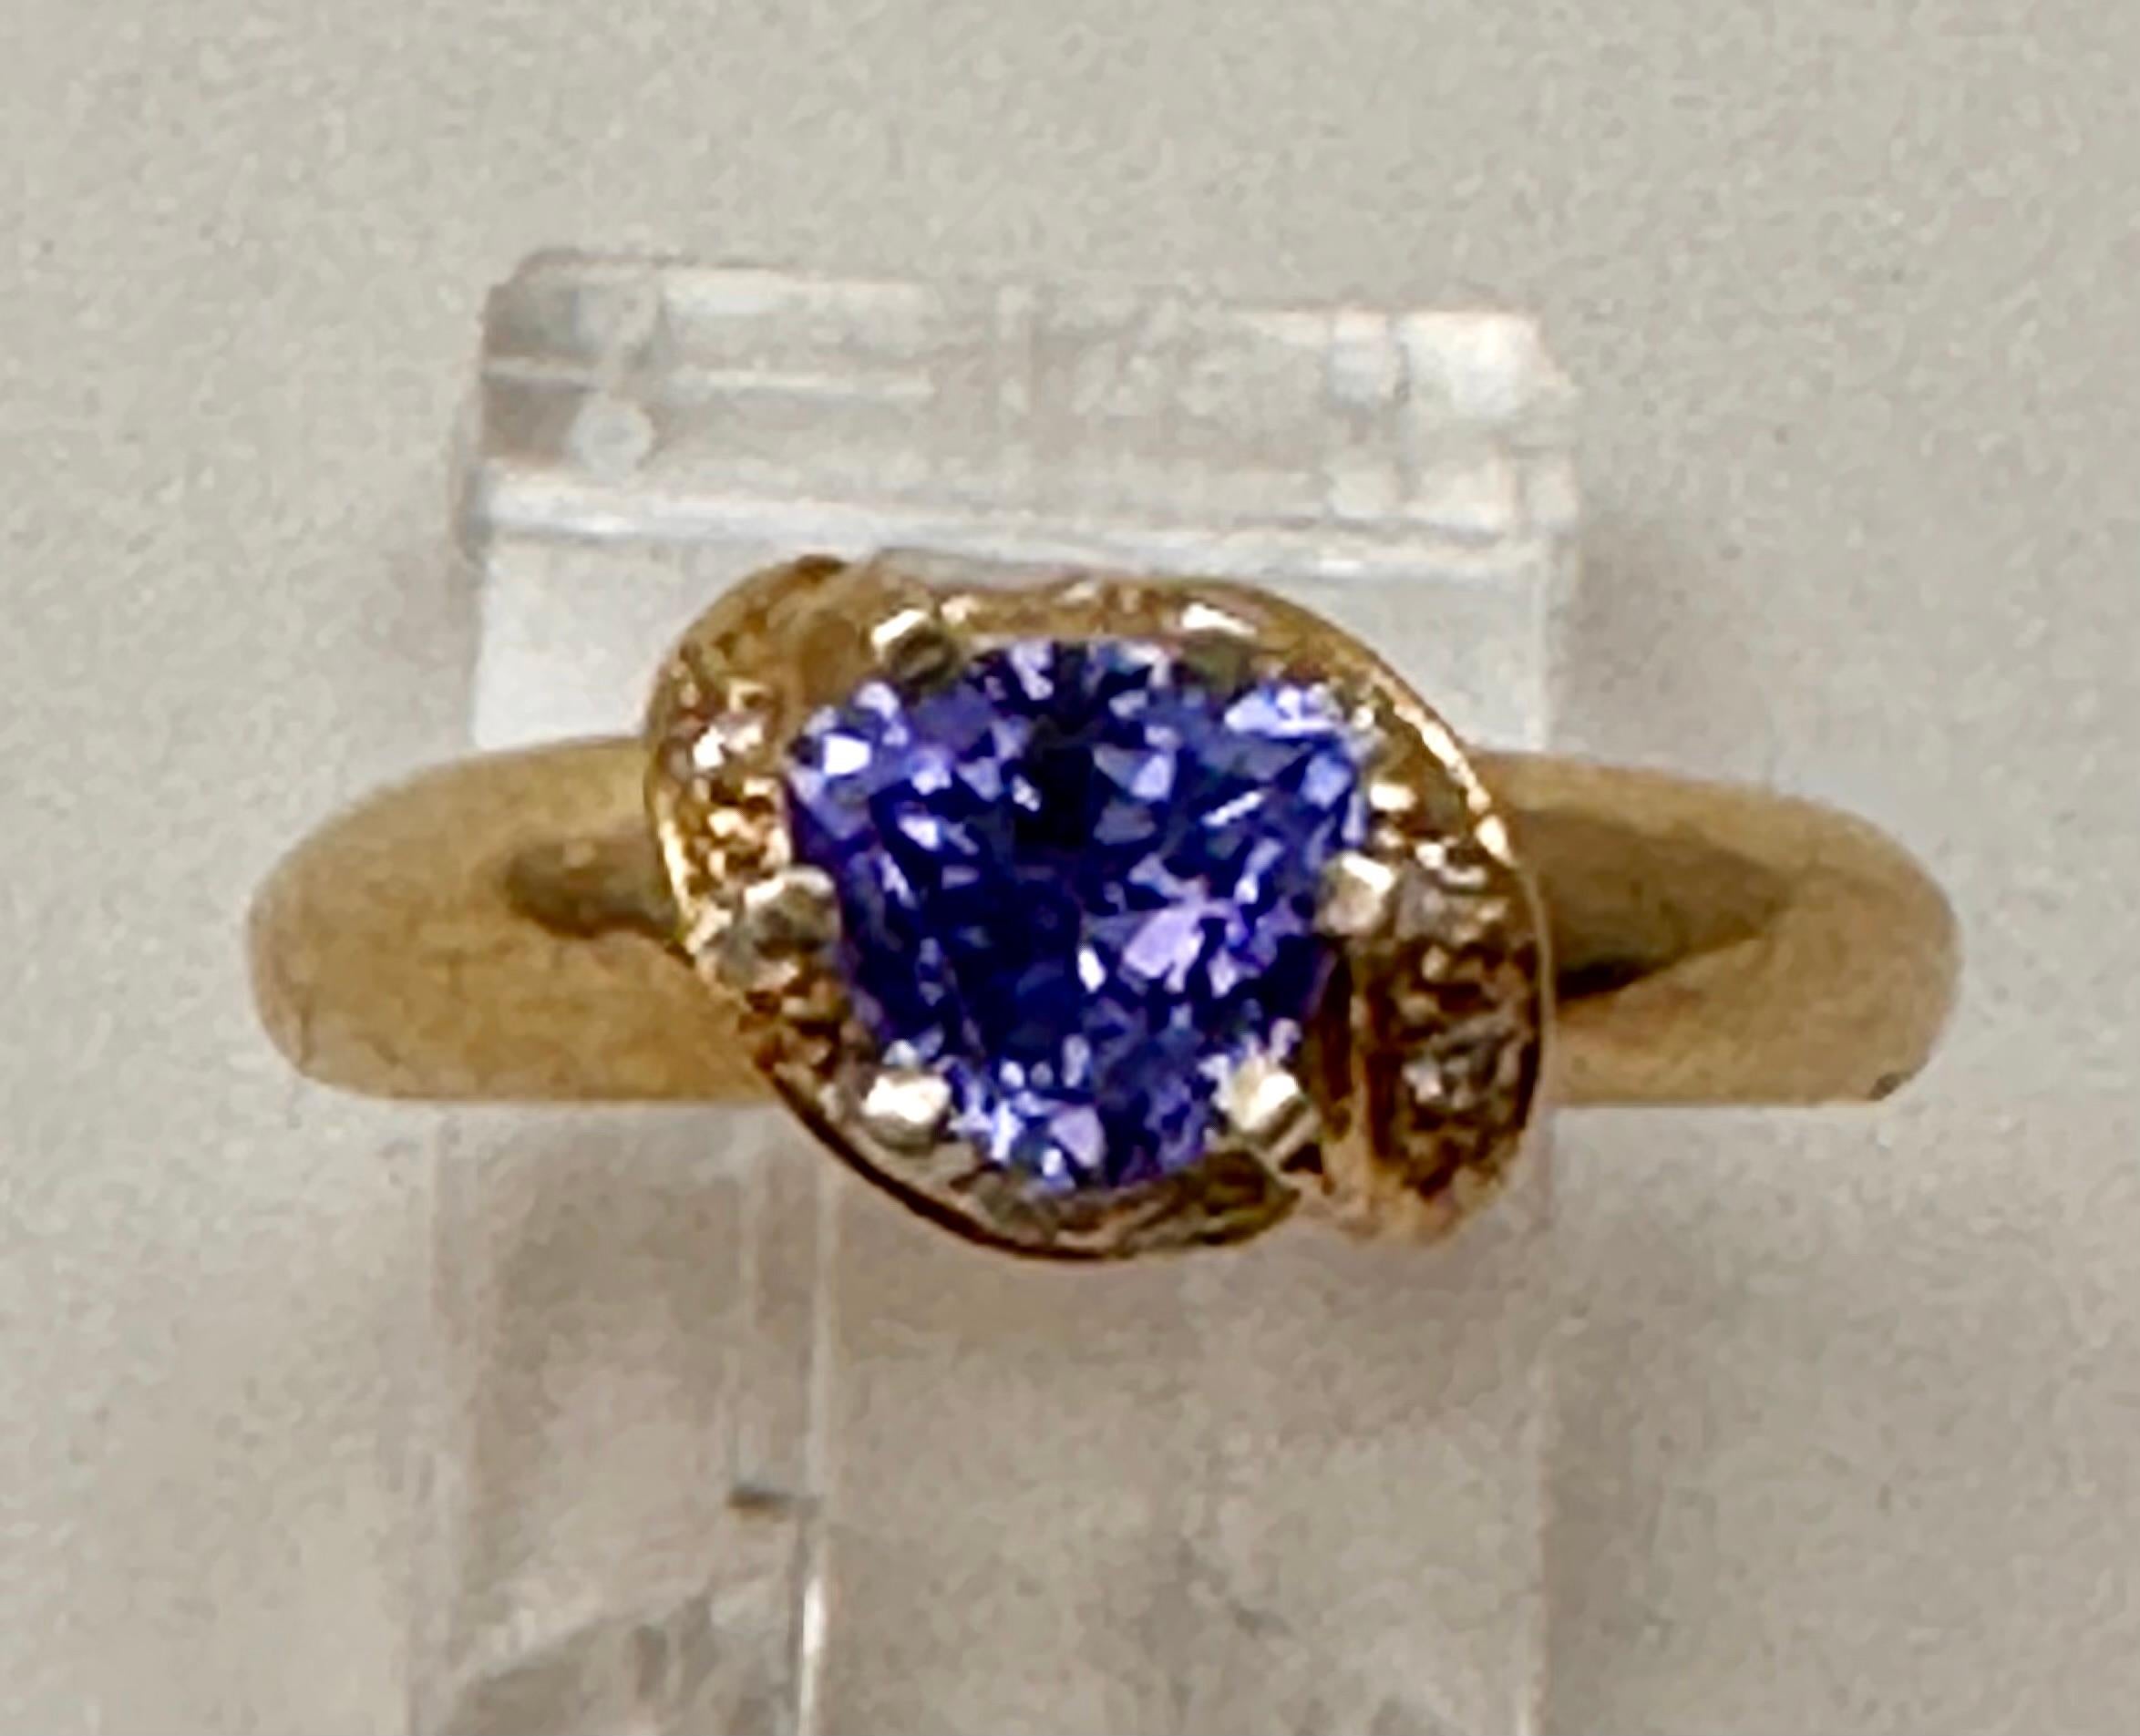 14k Yellow Gold 5.7mm Trillion Cut Tanzanite 10 round Diamonds 
Ring Size 6

Tanzanite 

Tanzanite changes colors when it is viewed from different directions. This shifting of colors has been said to facilitate raising consciousness. It aids in